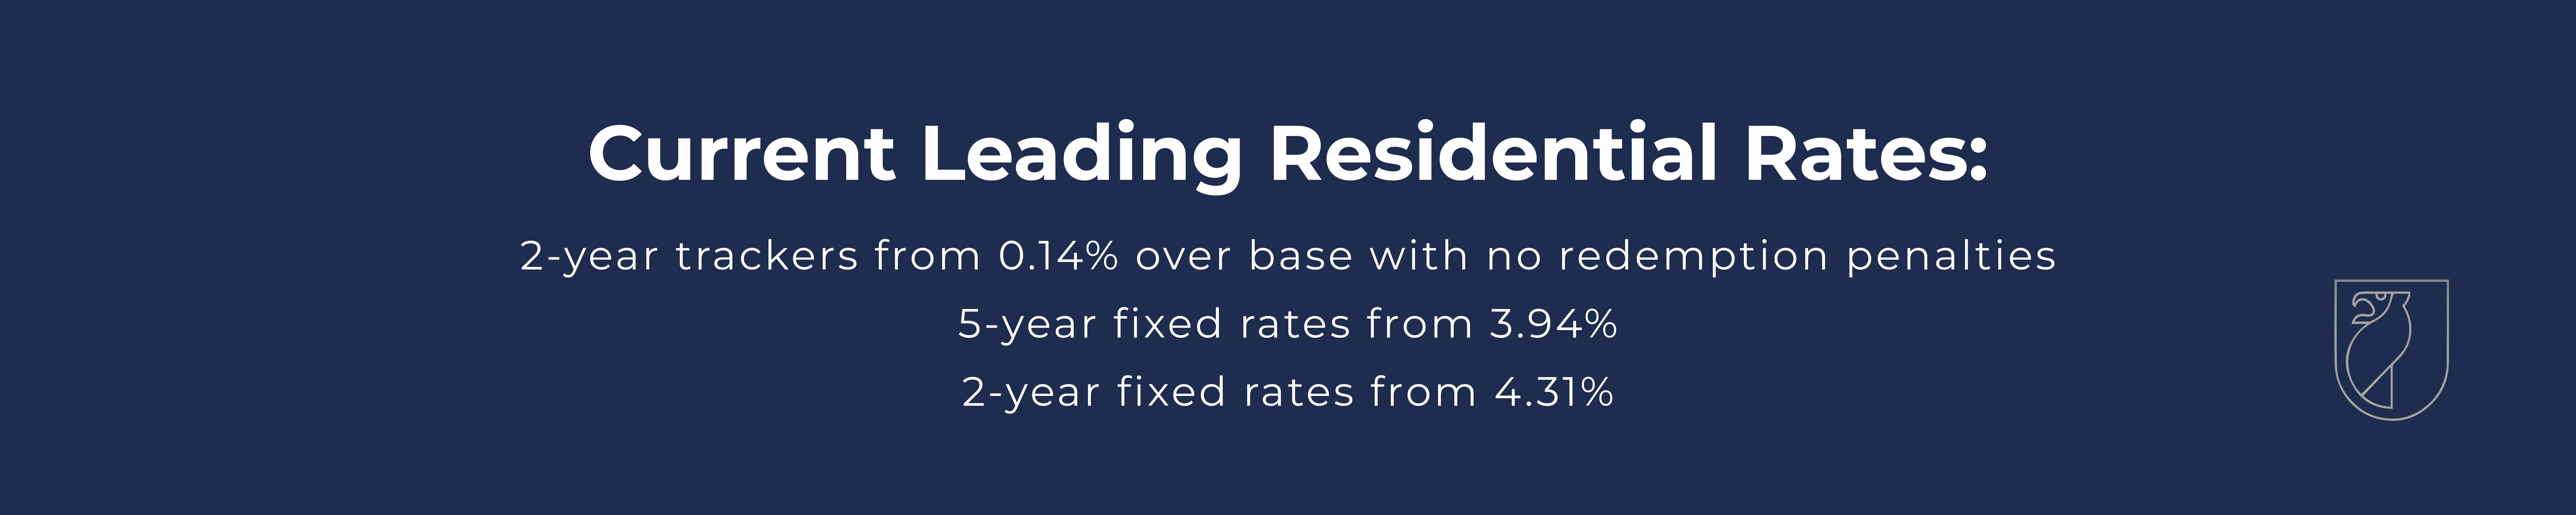 Residential leading rates